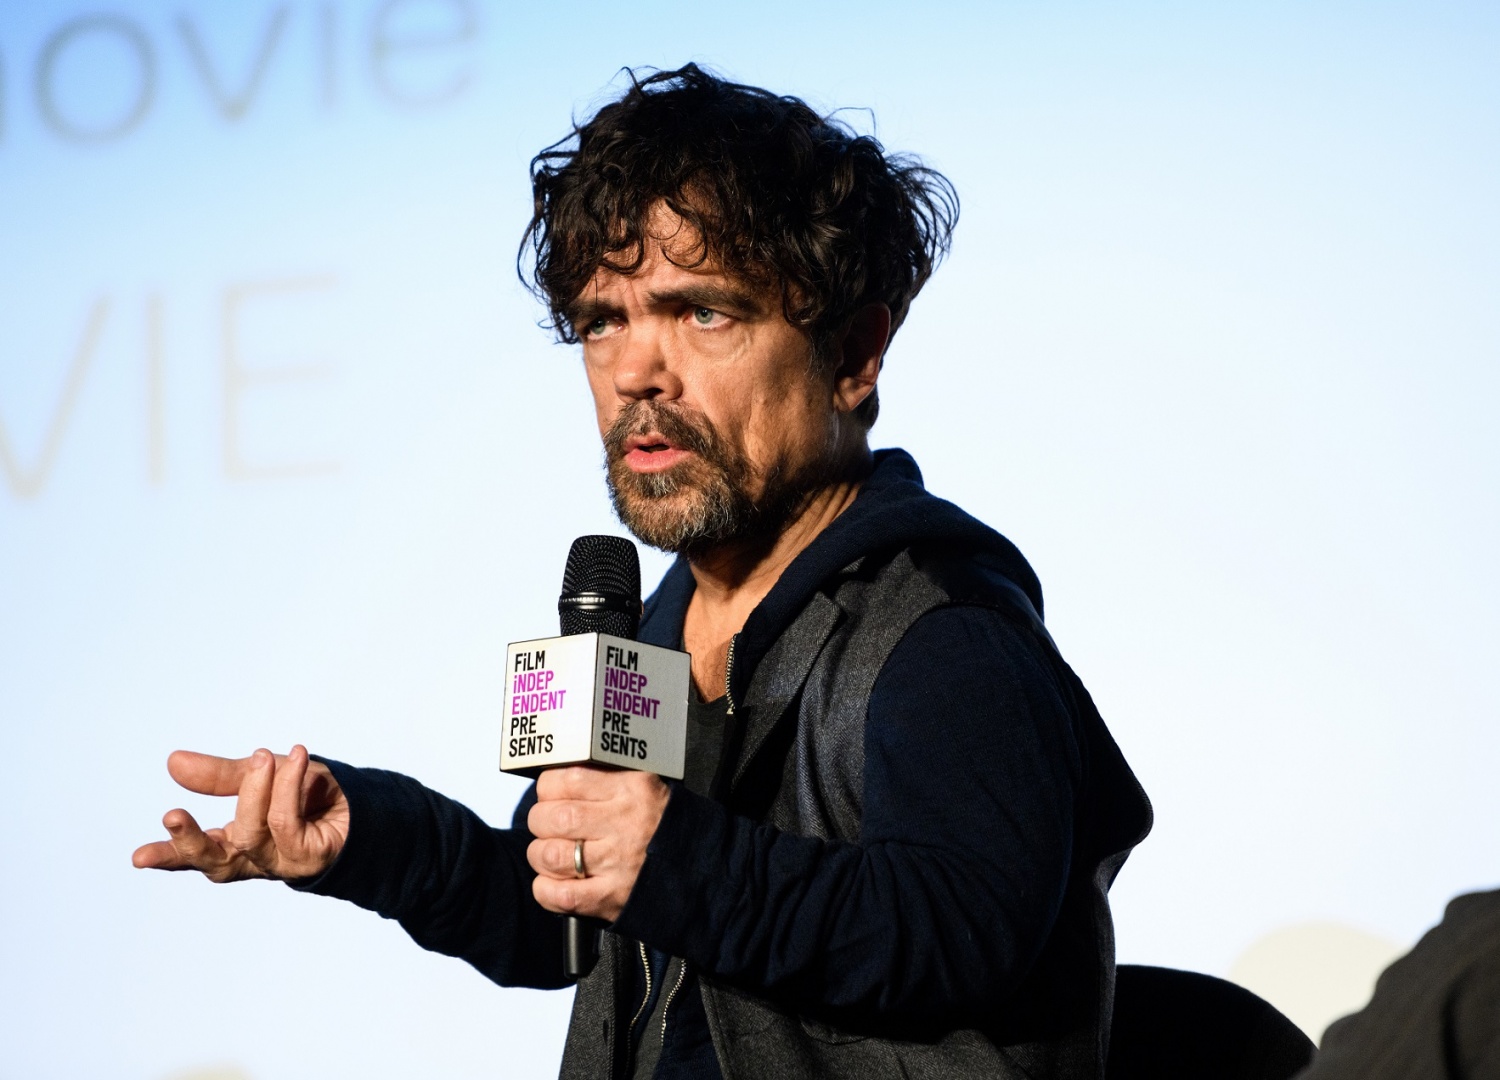 Actor Peter Dinklage attends the Film Independent Screening of "Cyrano" at Harmony Gold on December 11, 2021 in Los Angeles, California. (Photo by Amanda Edwards/Getty Images)